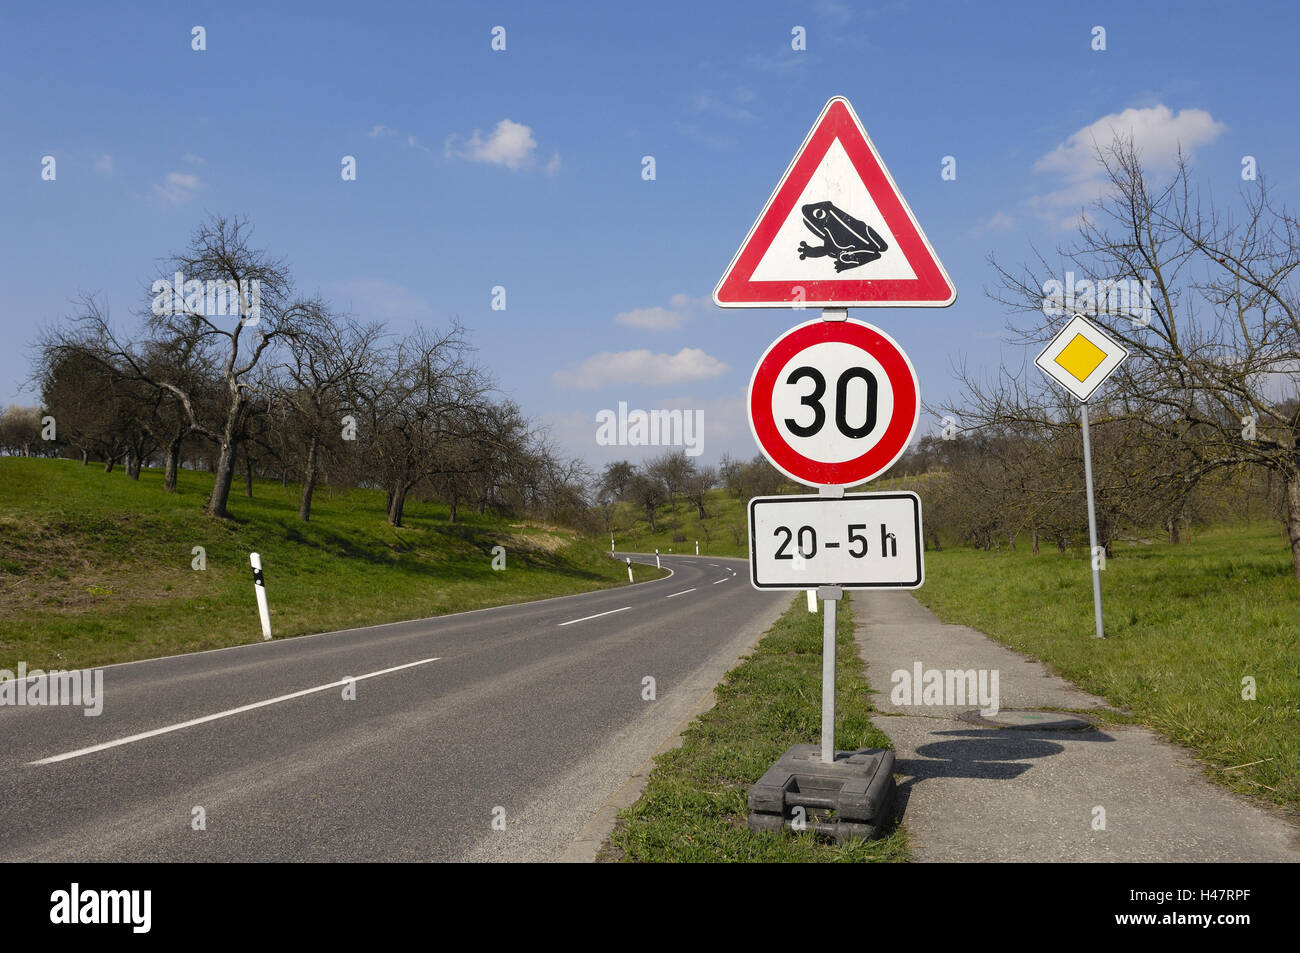 streets, toad migration, traffic signs Stock Photo